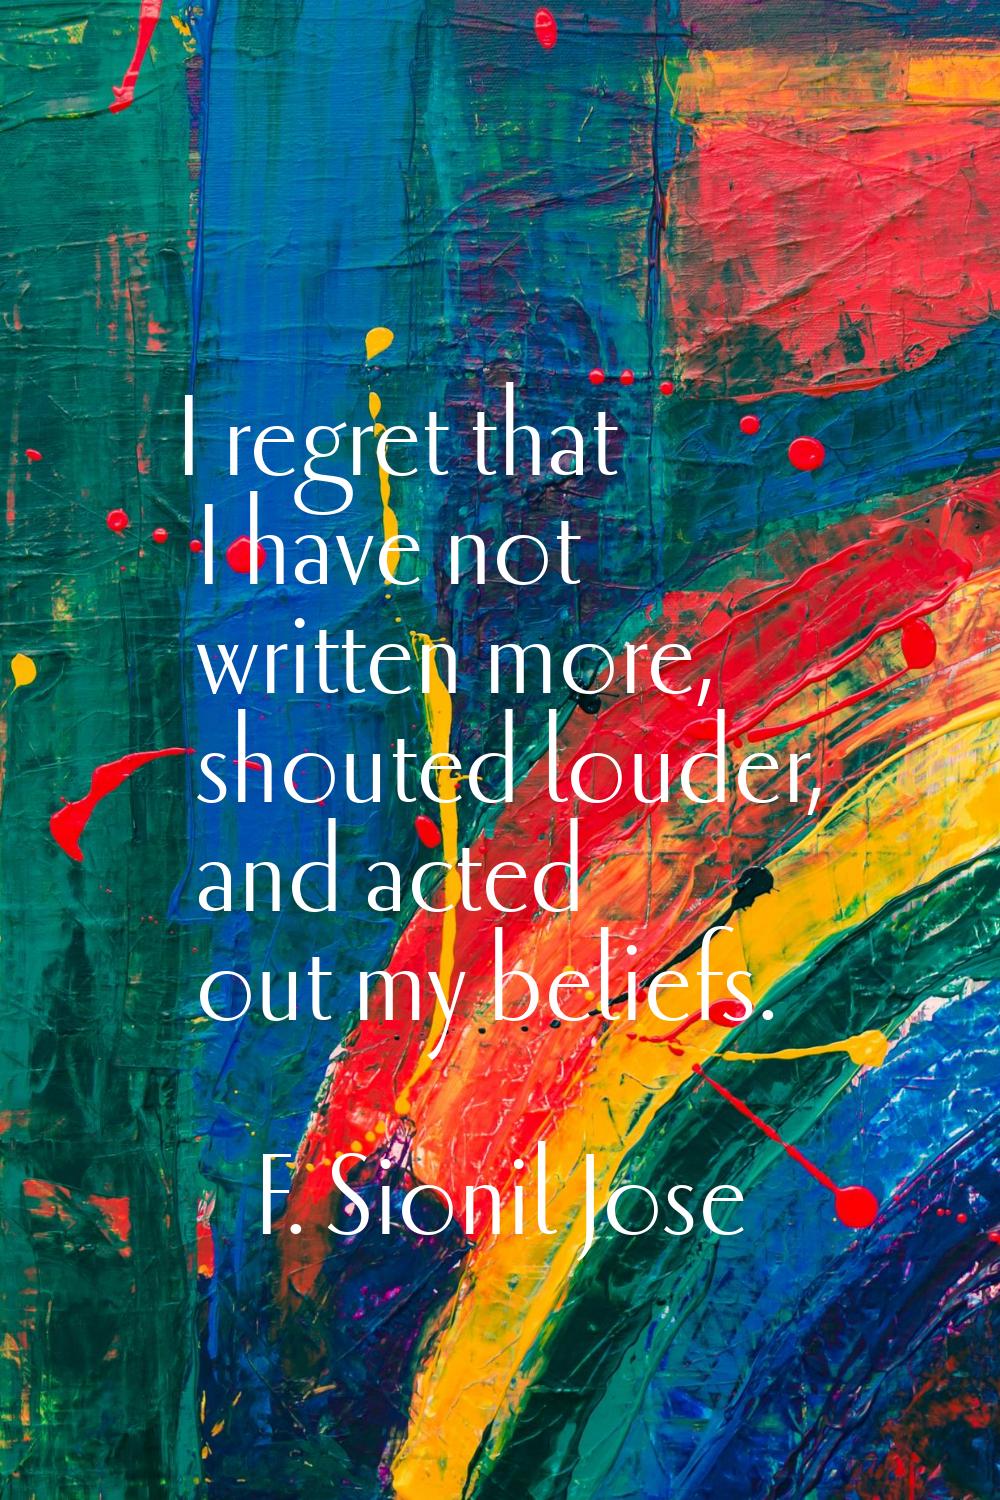 I regret that I have not written more, shouted louder, and acted out my beliefs.